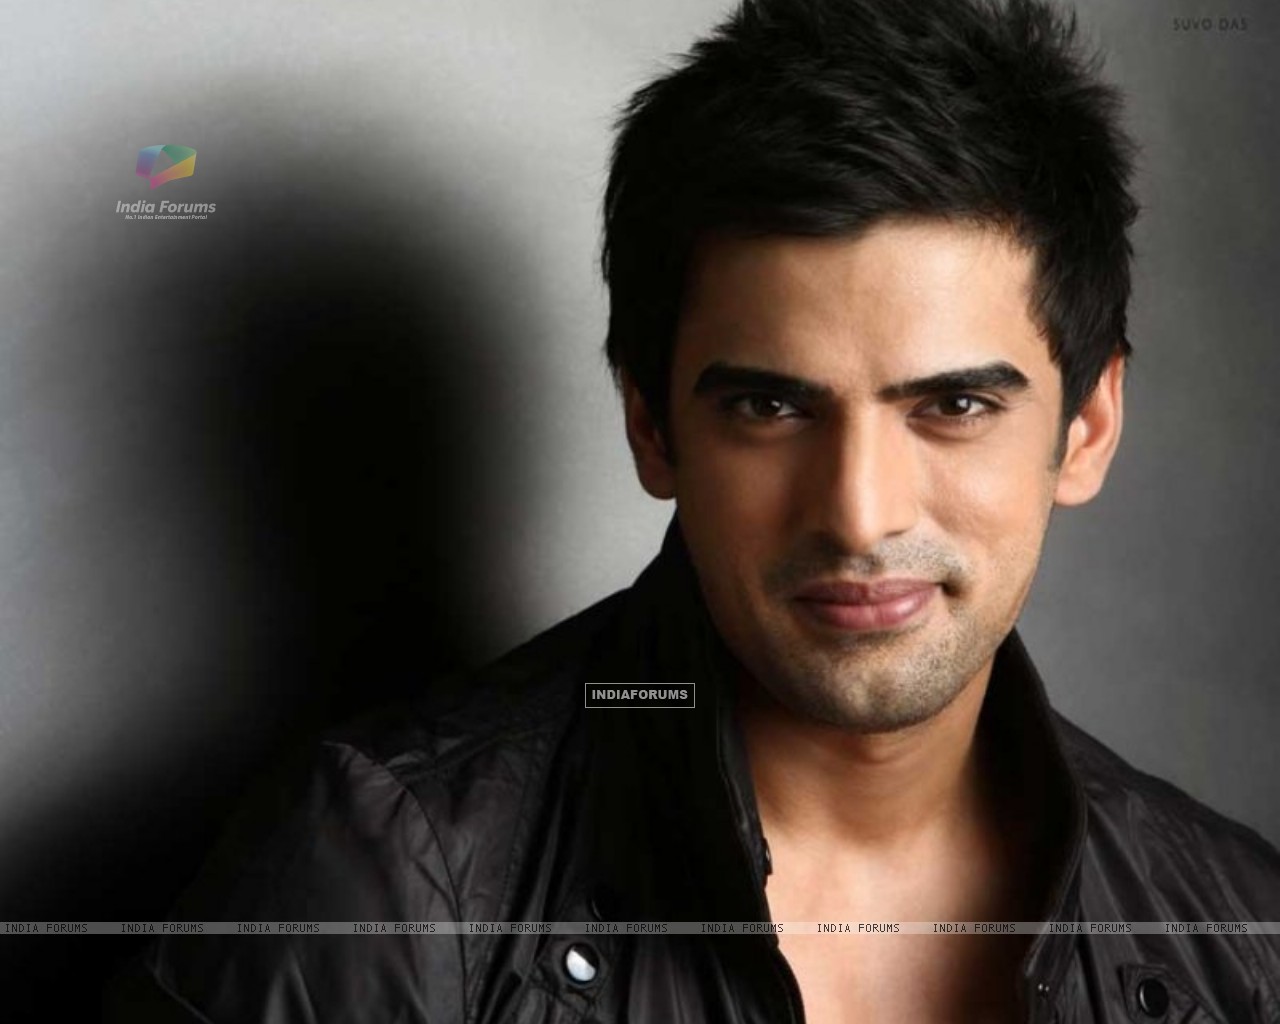 Download links of <b>Mohit Malik</b> wallpaper images with the image title as &quot; <b>...</b> - 39478-mohit-malik